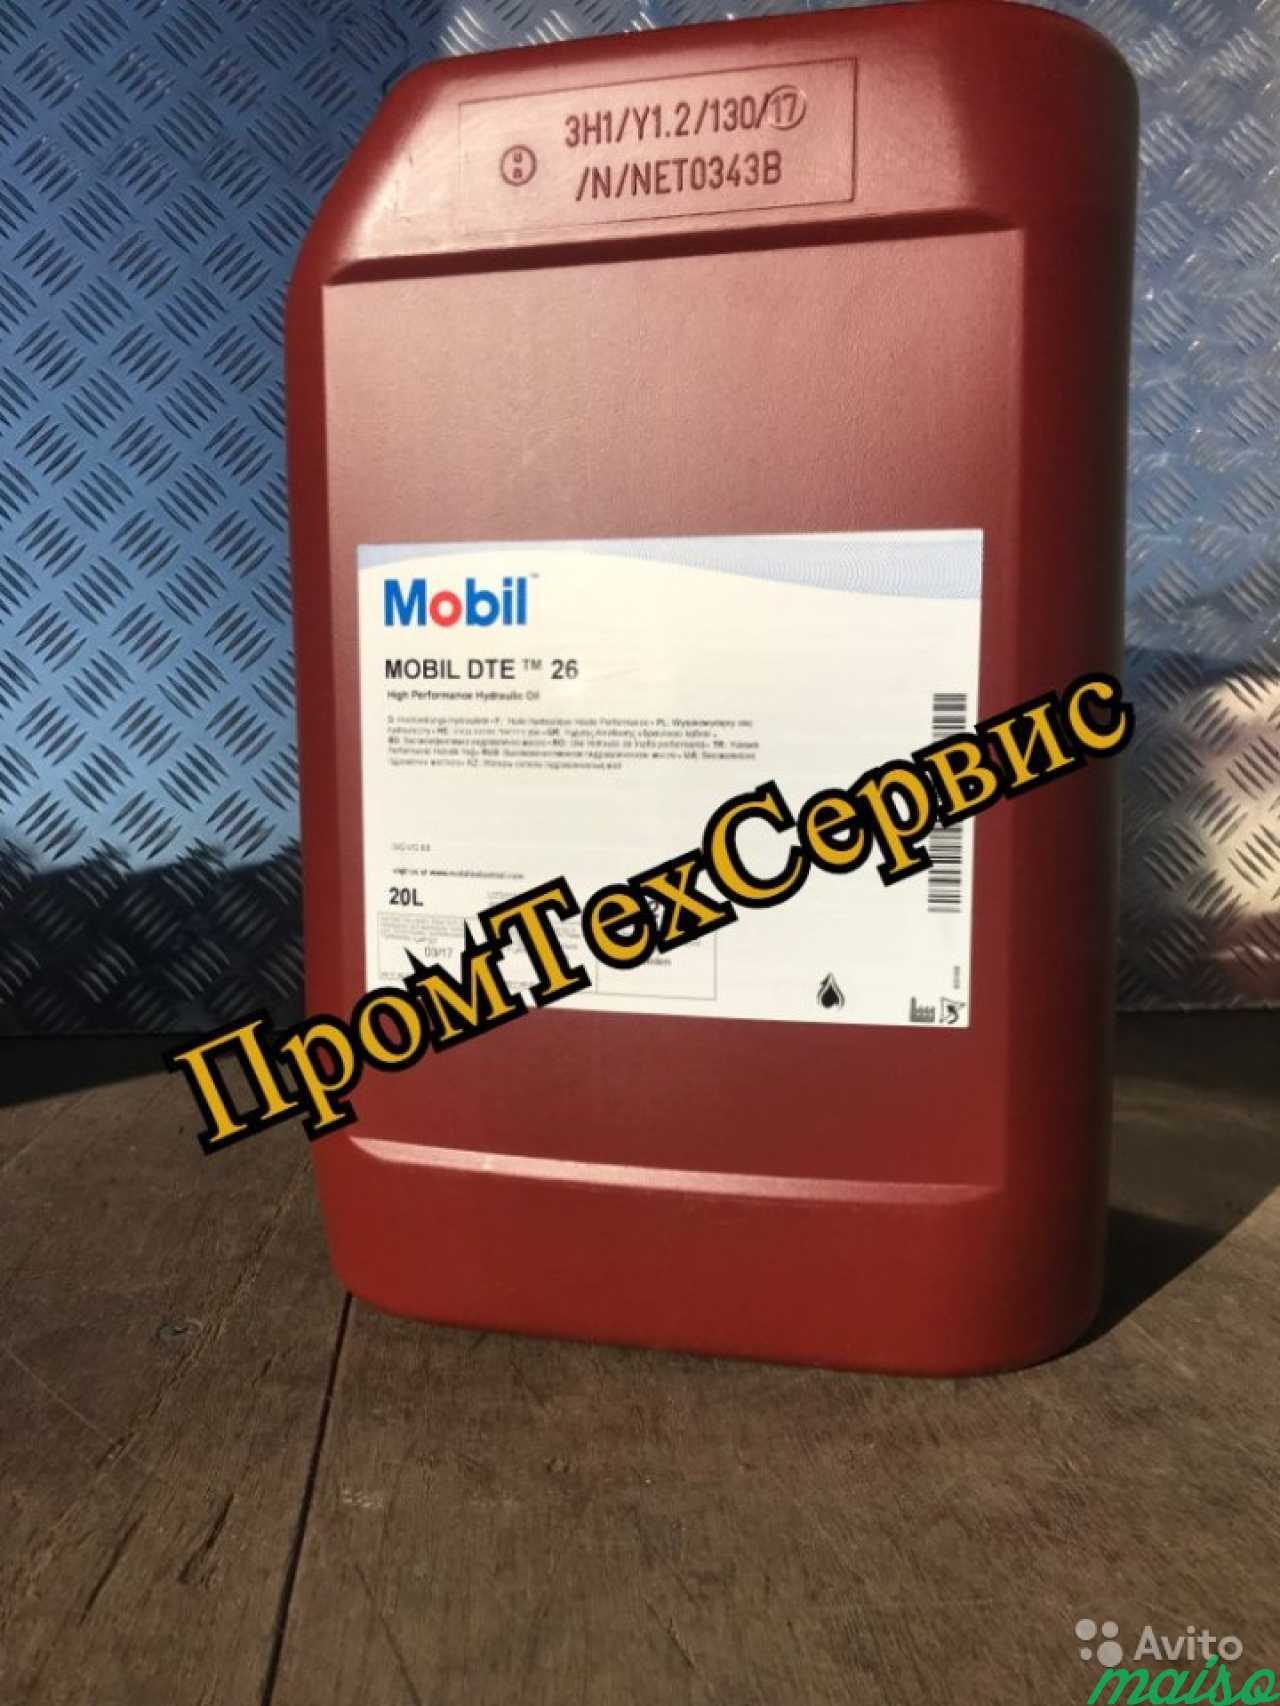 Масло mobil 20л. Гидравлическое масло mobil DTE 26. Масло mobil tde26. Гидравлическое масло мобил DTE 26 Ultra. Mobil DTE 25 Ultra 20л.